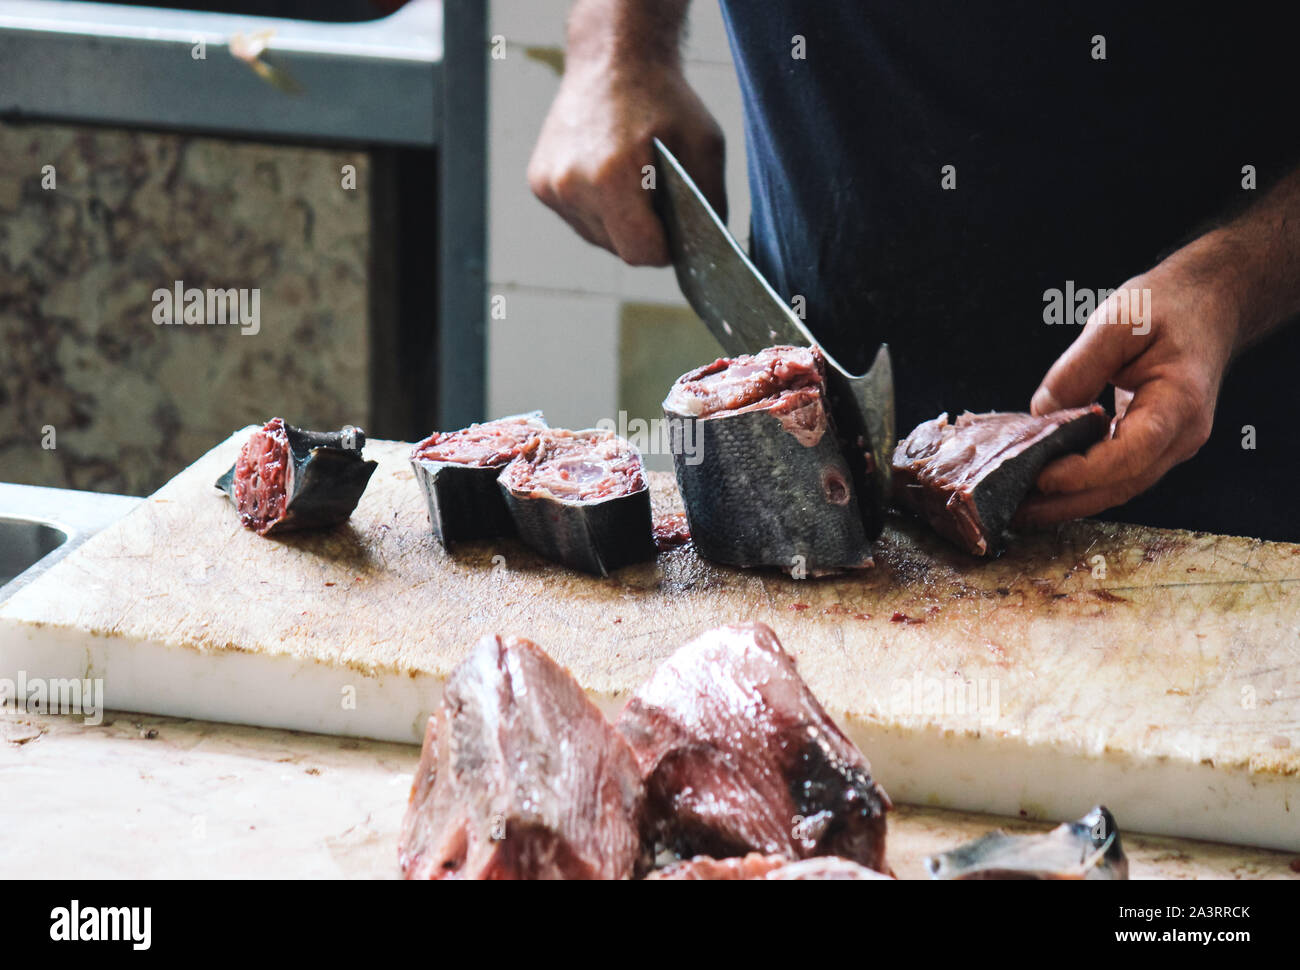 Close up hands of fisherman cutting tuna with a huge cleaver on a wooden board. Blurred tuna meat in the foreground. Local fish market in Funchal, Madeira, Portugal. Animal rights, abuse, cruelty. Stock Photo